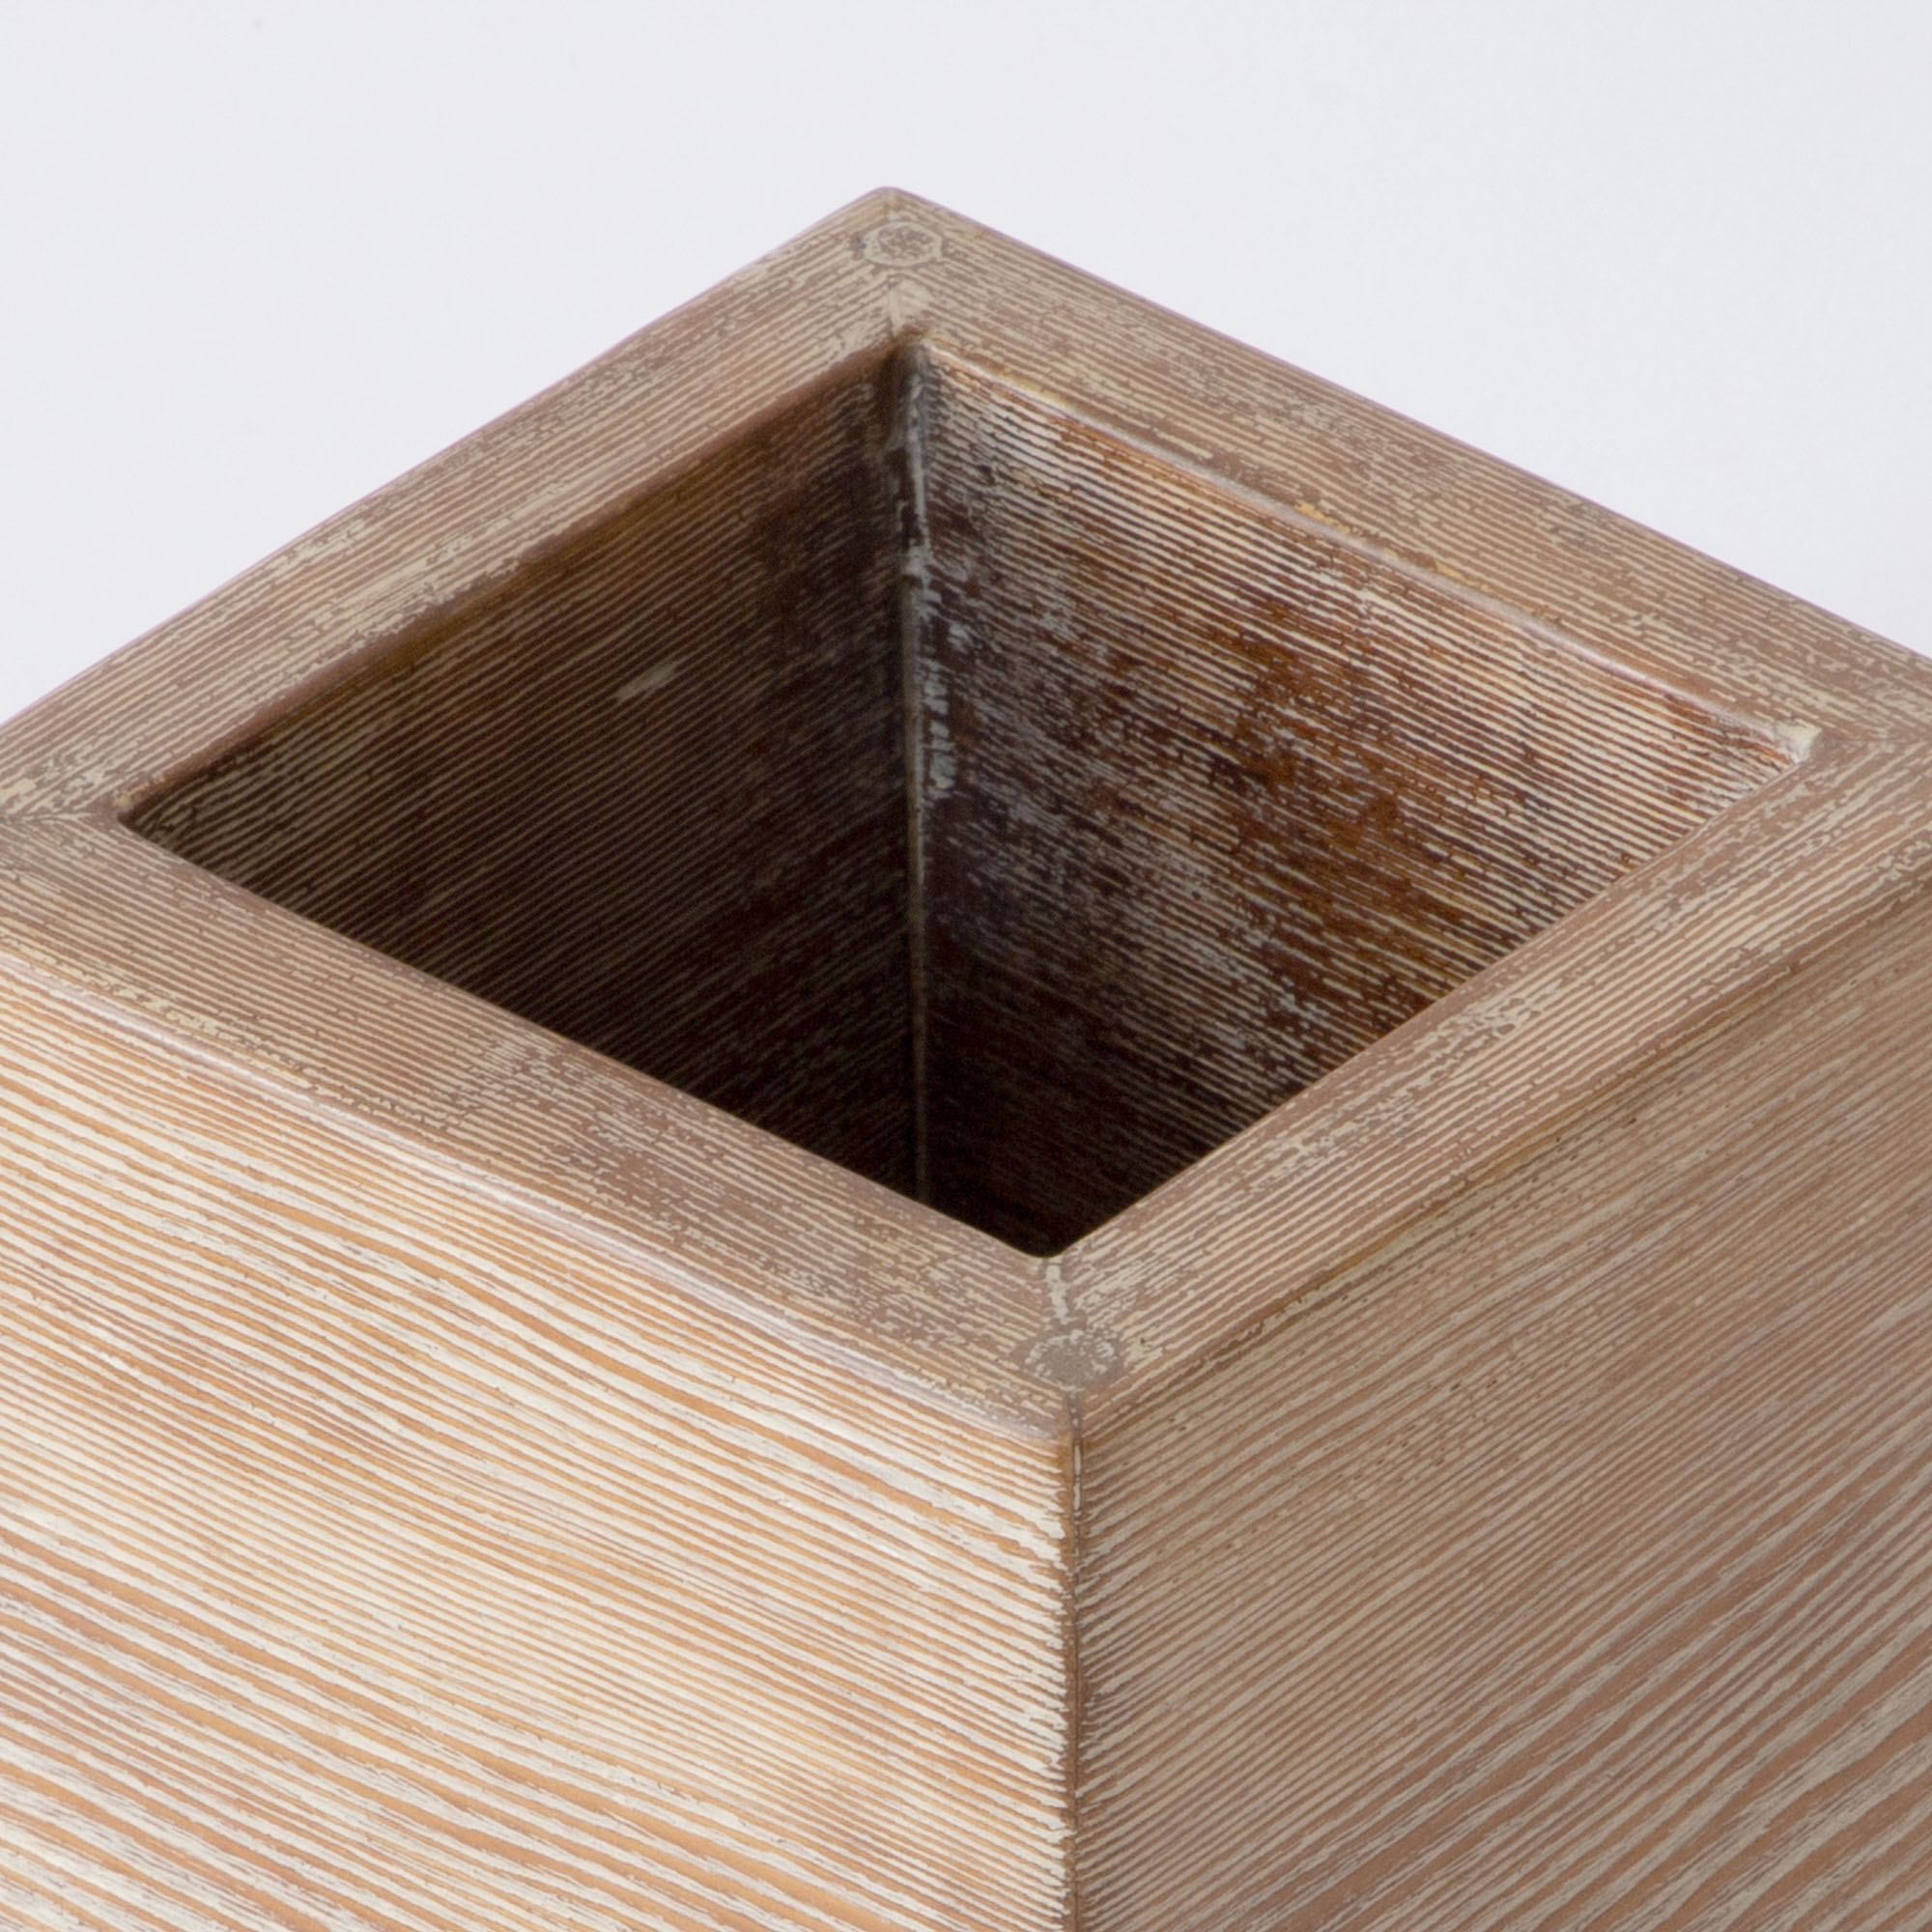 Hyde Cube Wooden Table Accessory